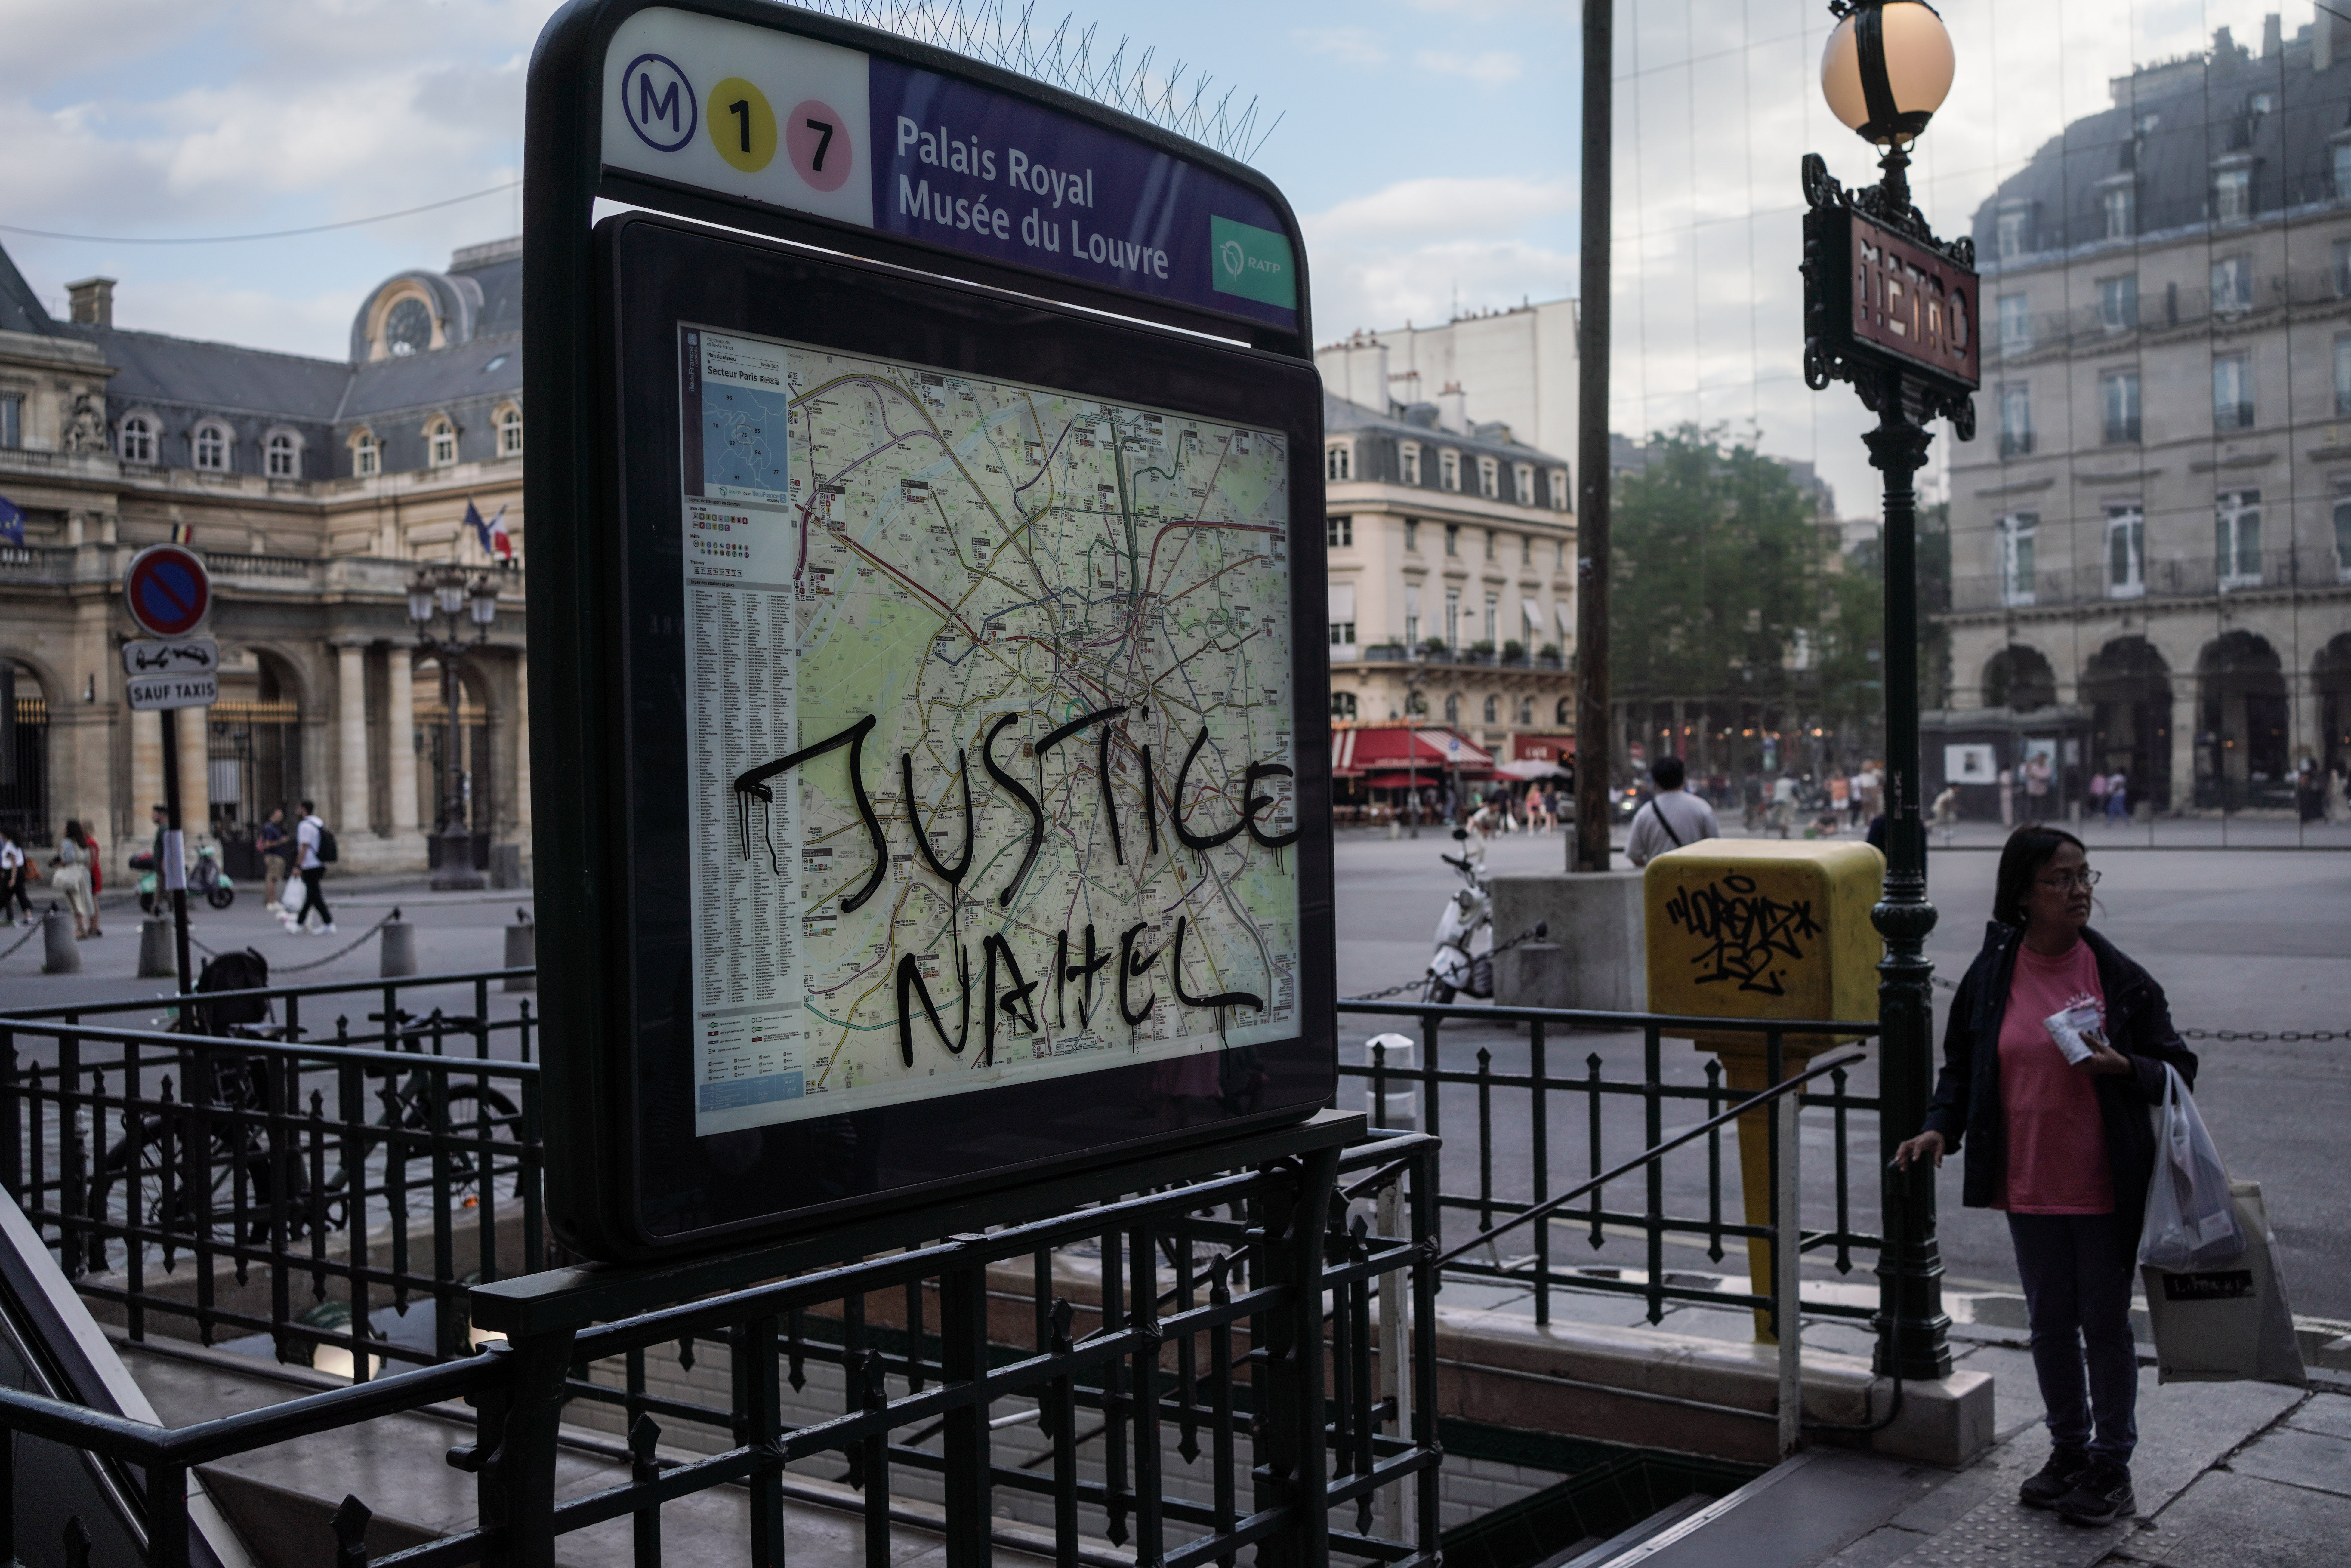 ‘Justice Nahel’ is scrawled the Palais Royal Musee du Louvre metro sign on 2 July 2023 in Paris, France